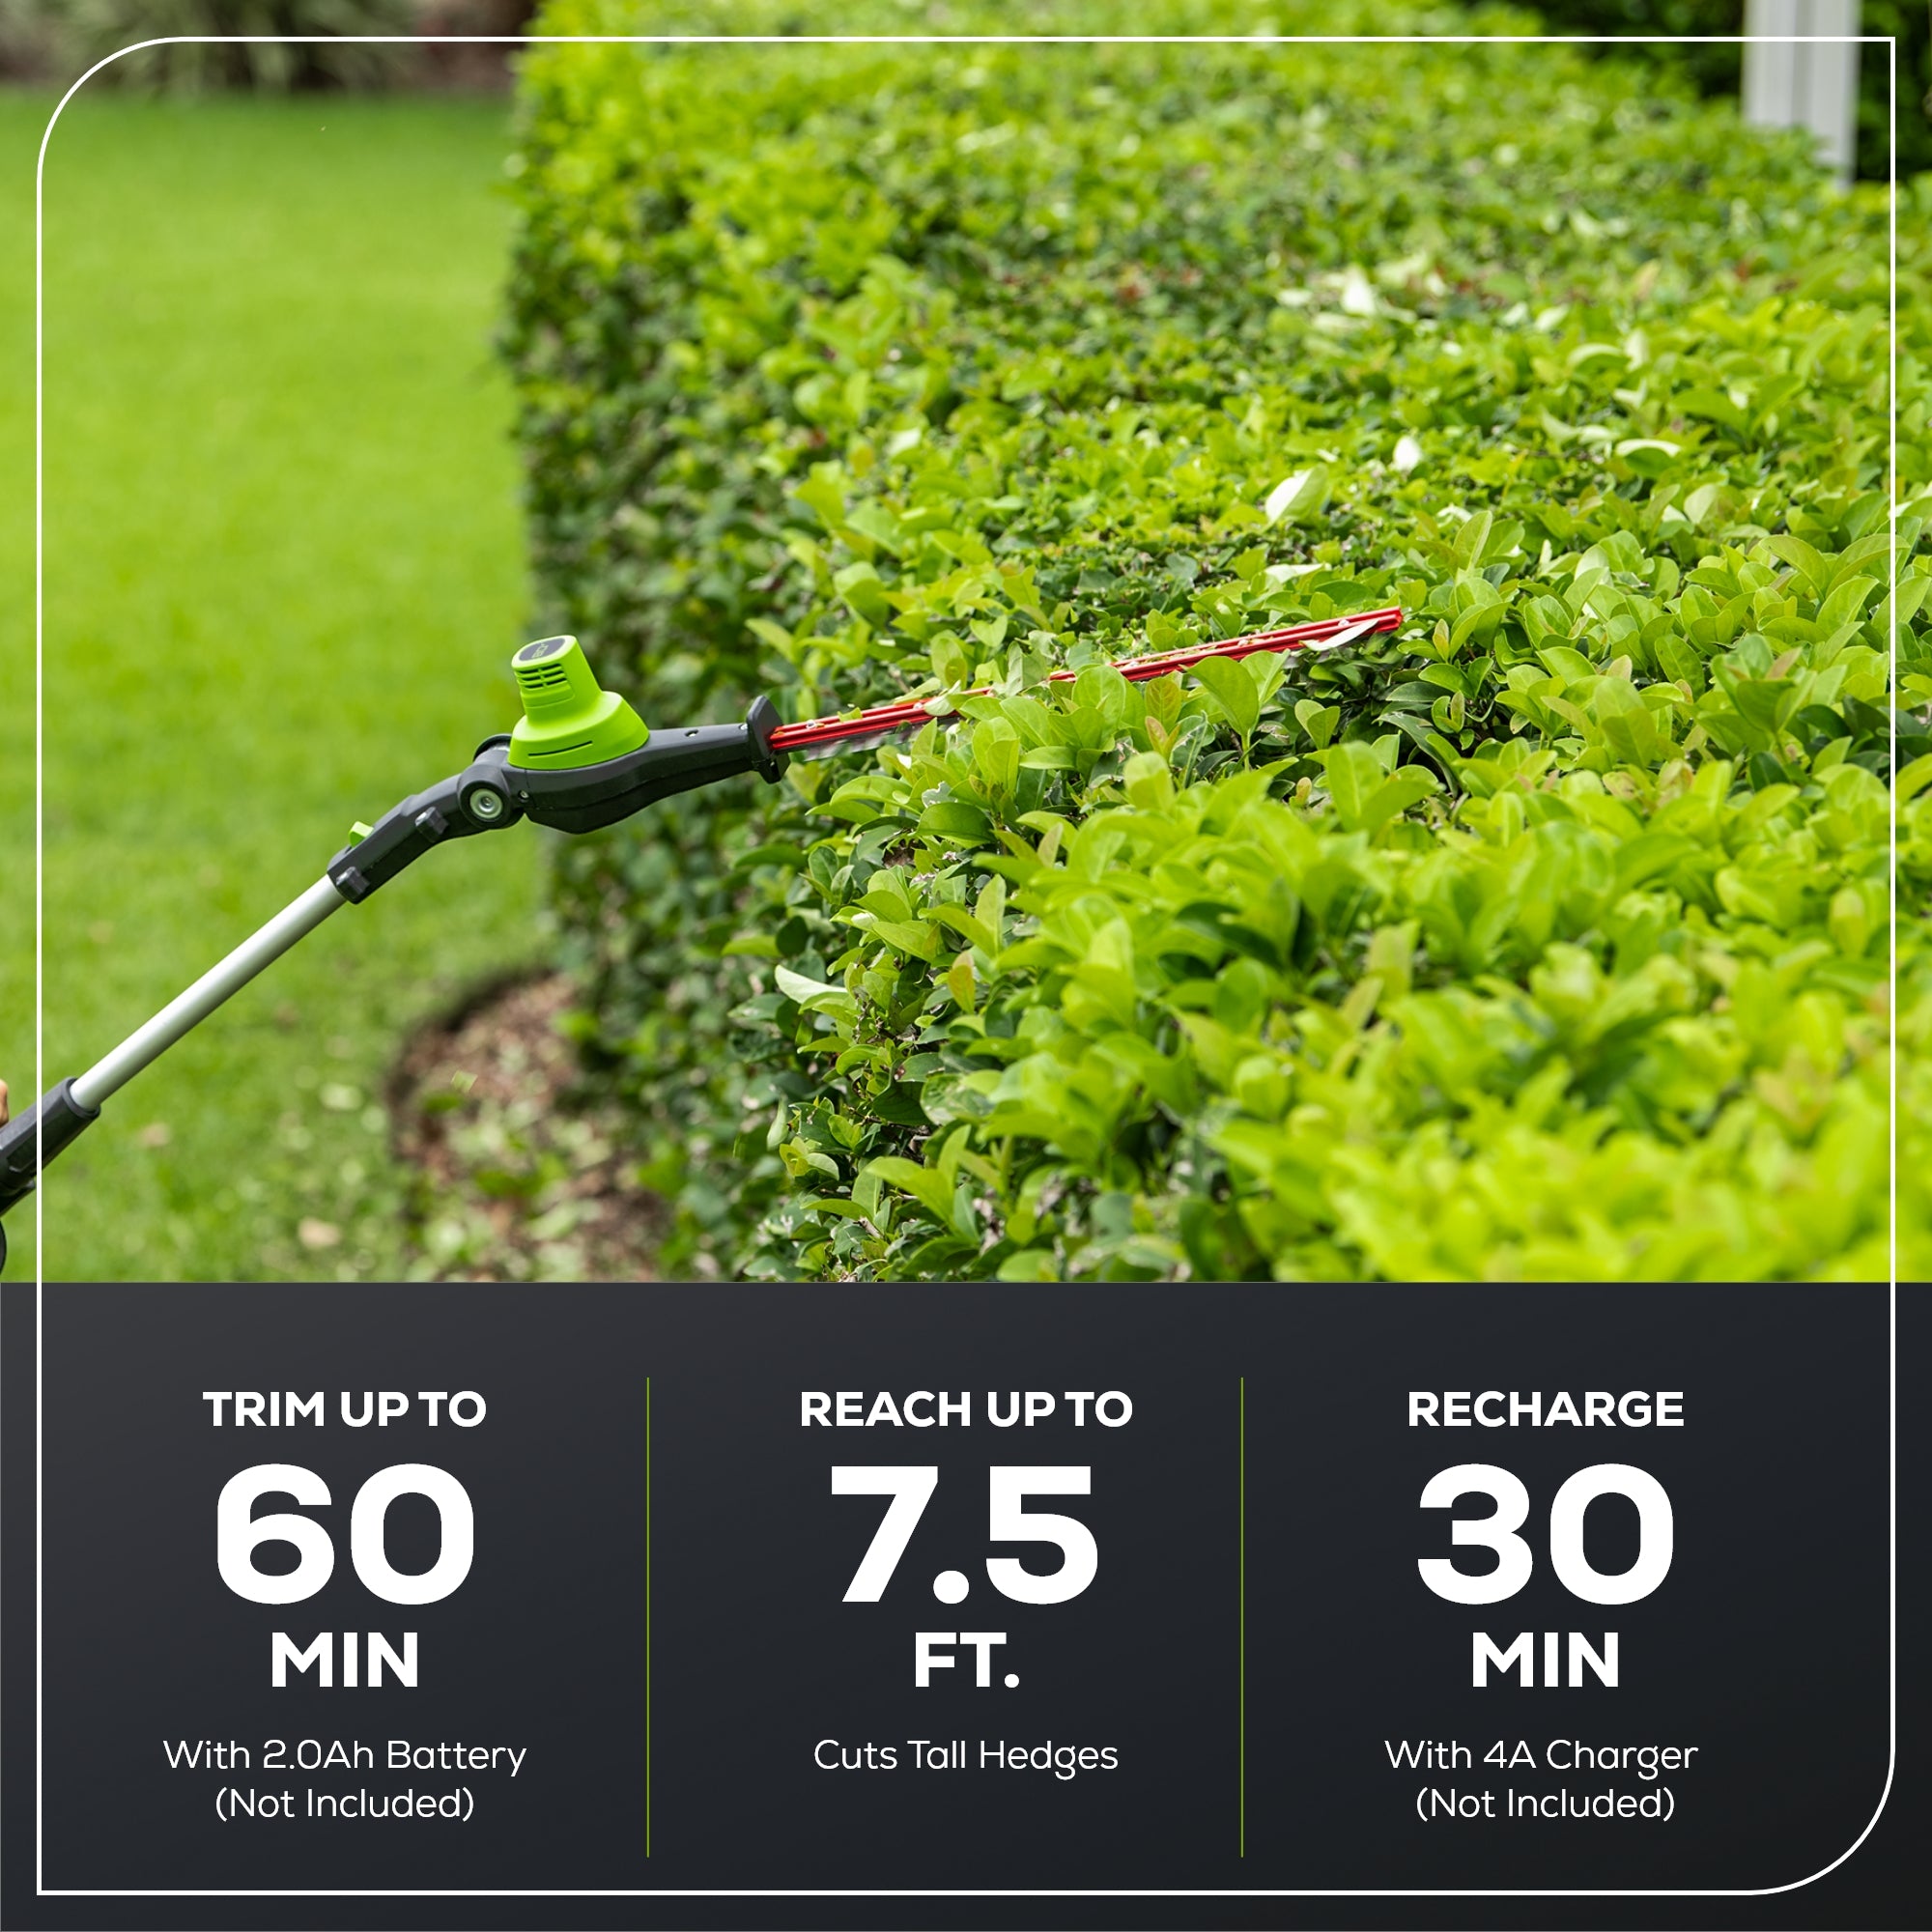 80V 20" Cordless Battery Pole Hedge Trimmer (Tool-Only)